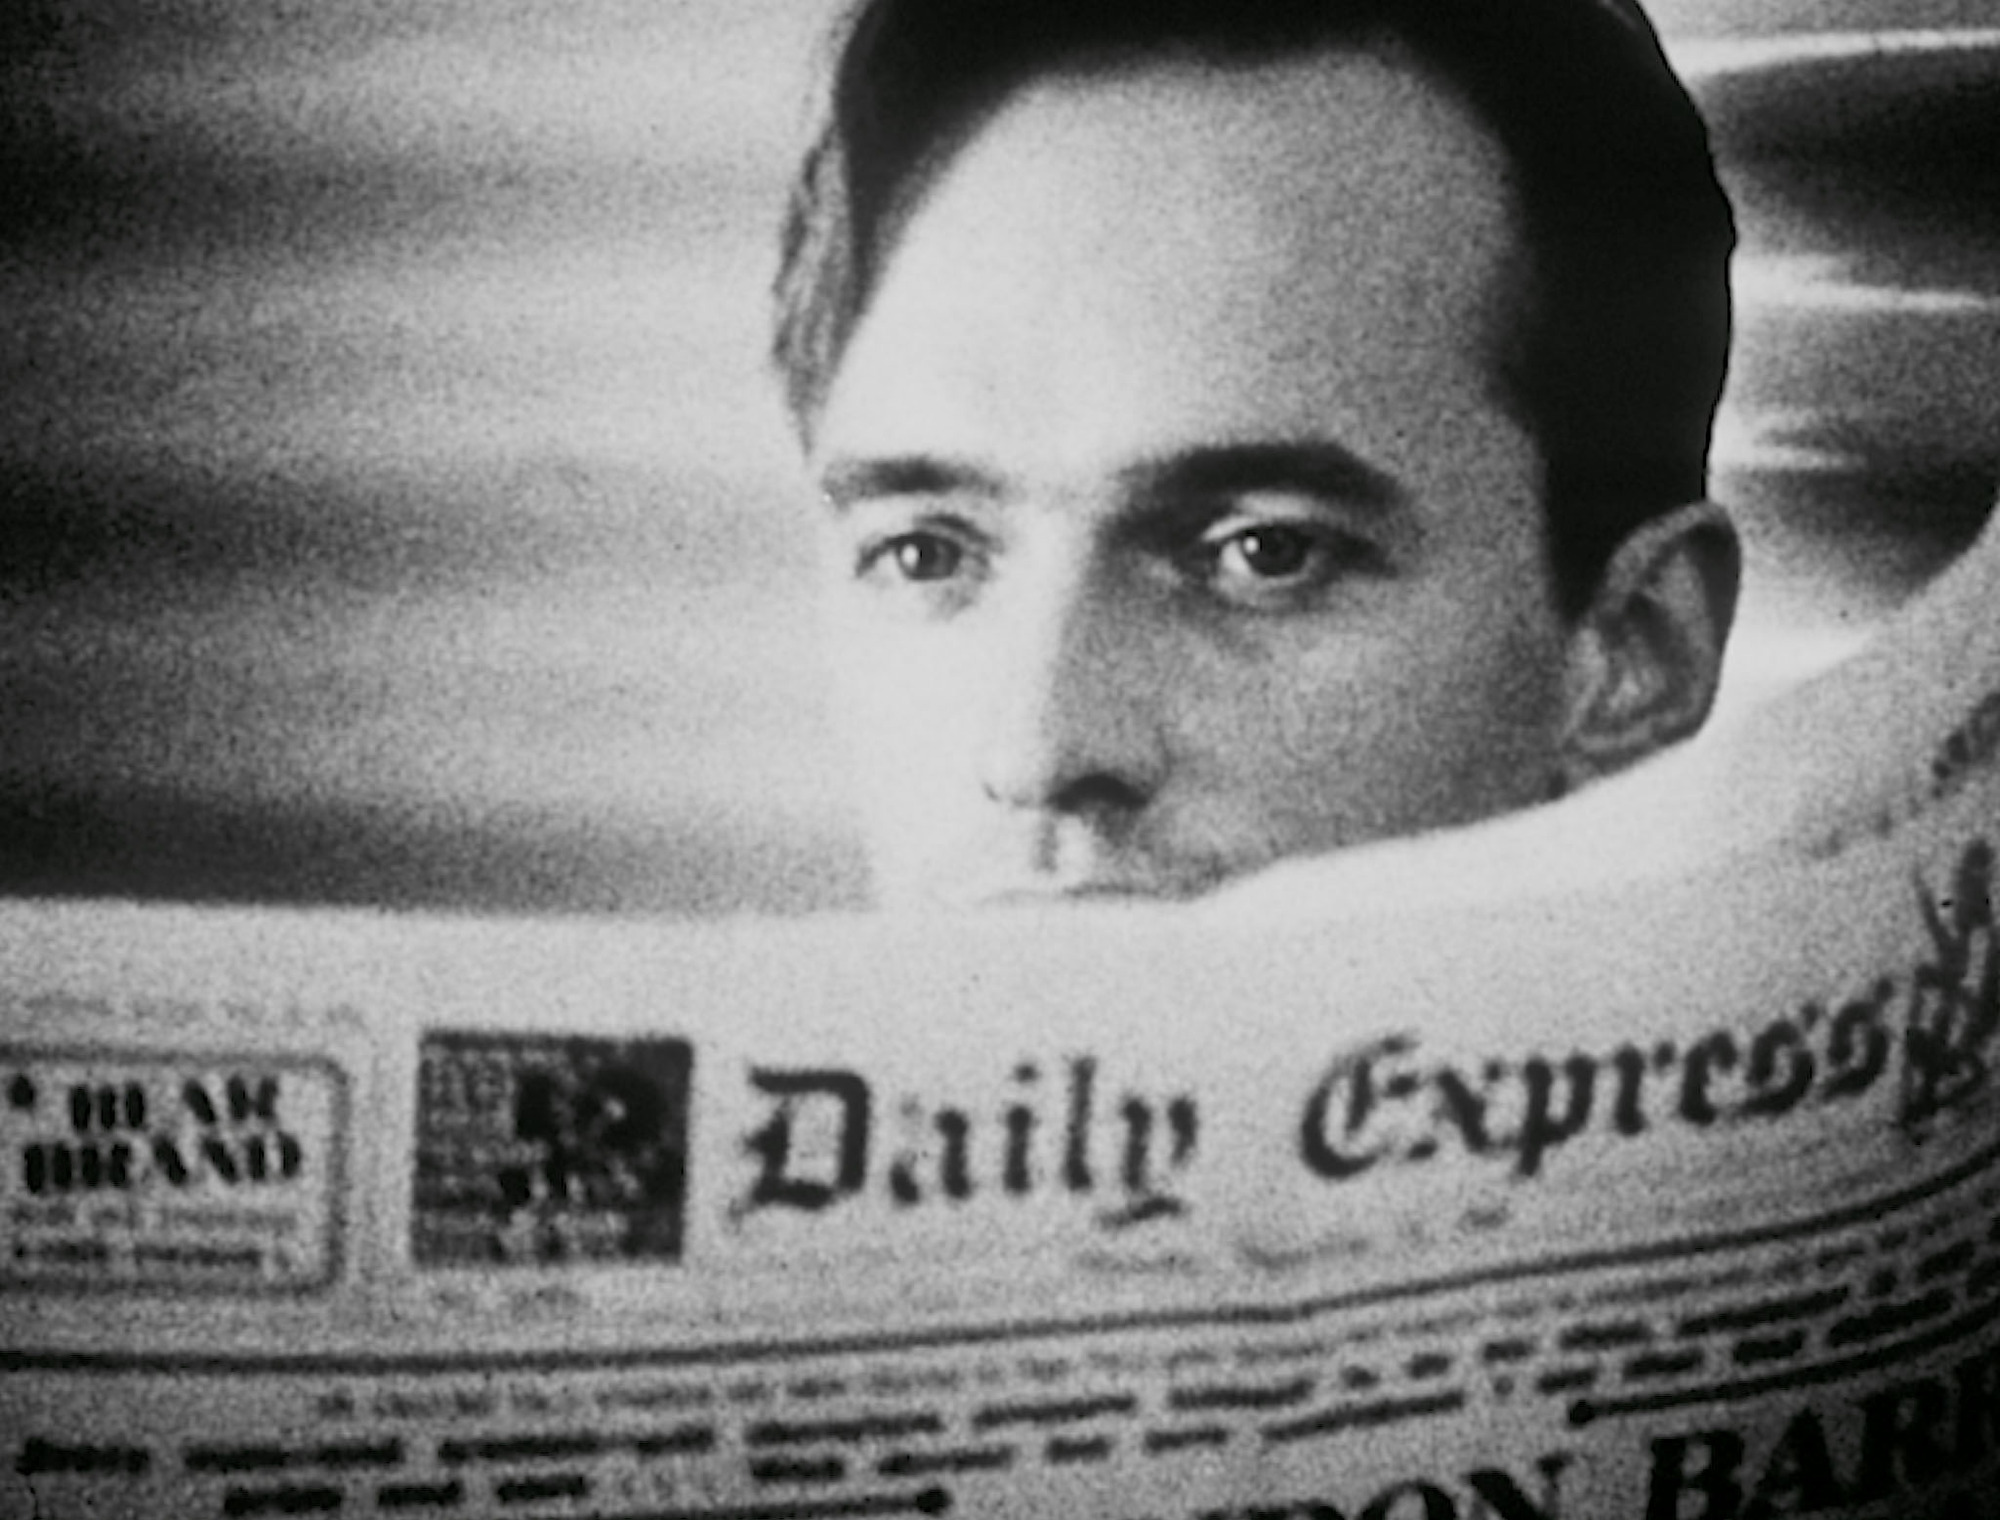 Black and white photo of a man peering over a newspaper